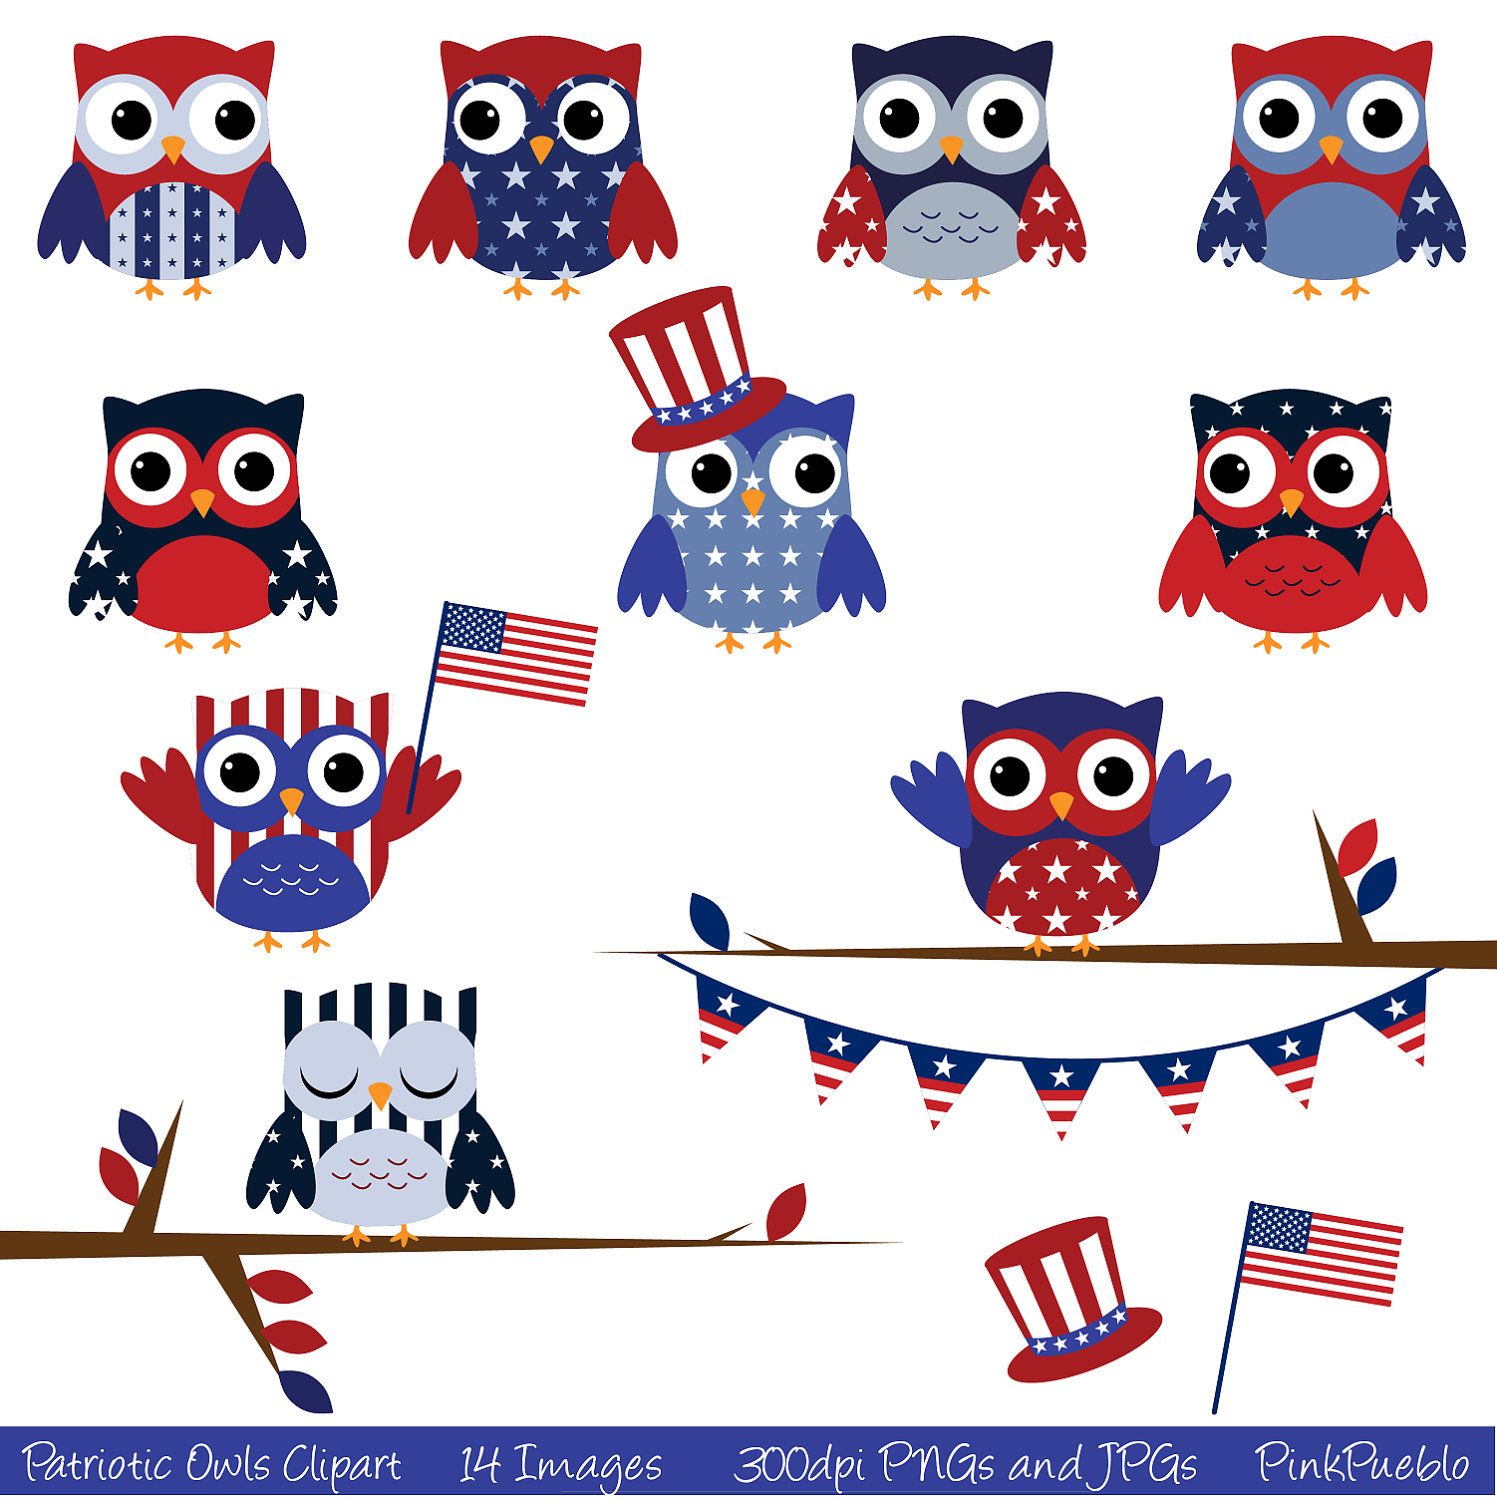 Patriotic Owls Clipart Clip Art, Fourth of July Owls Clipart